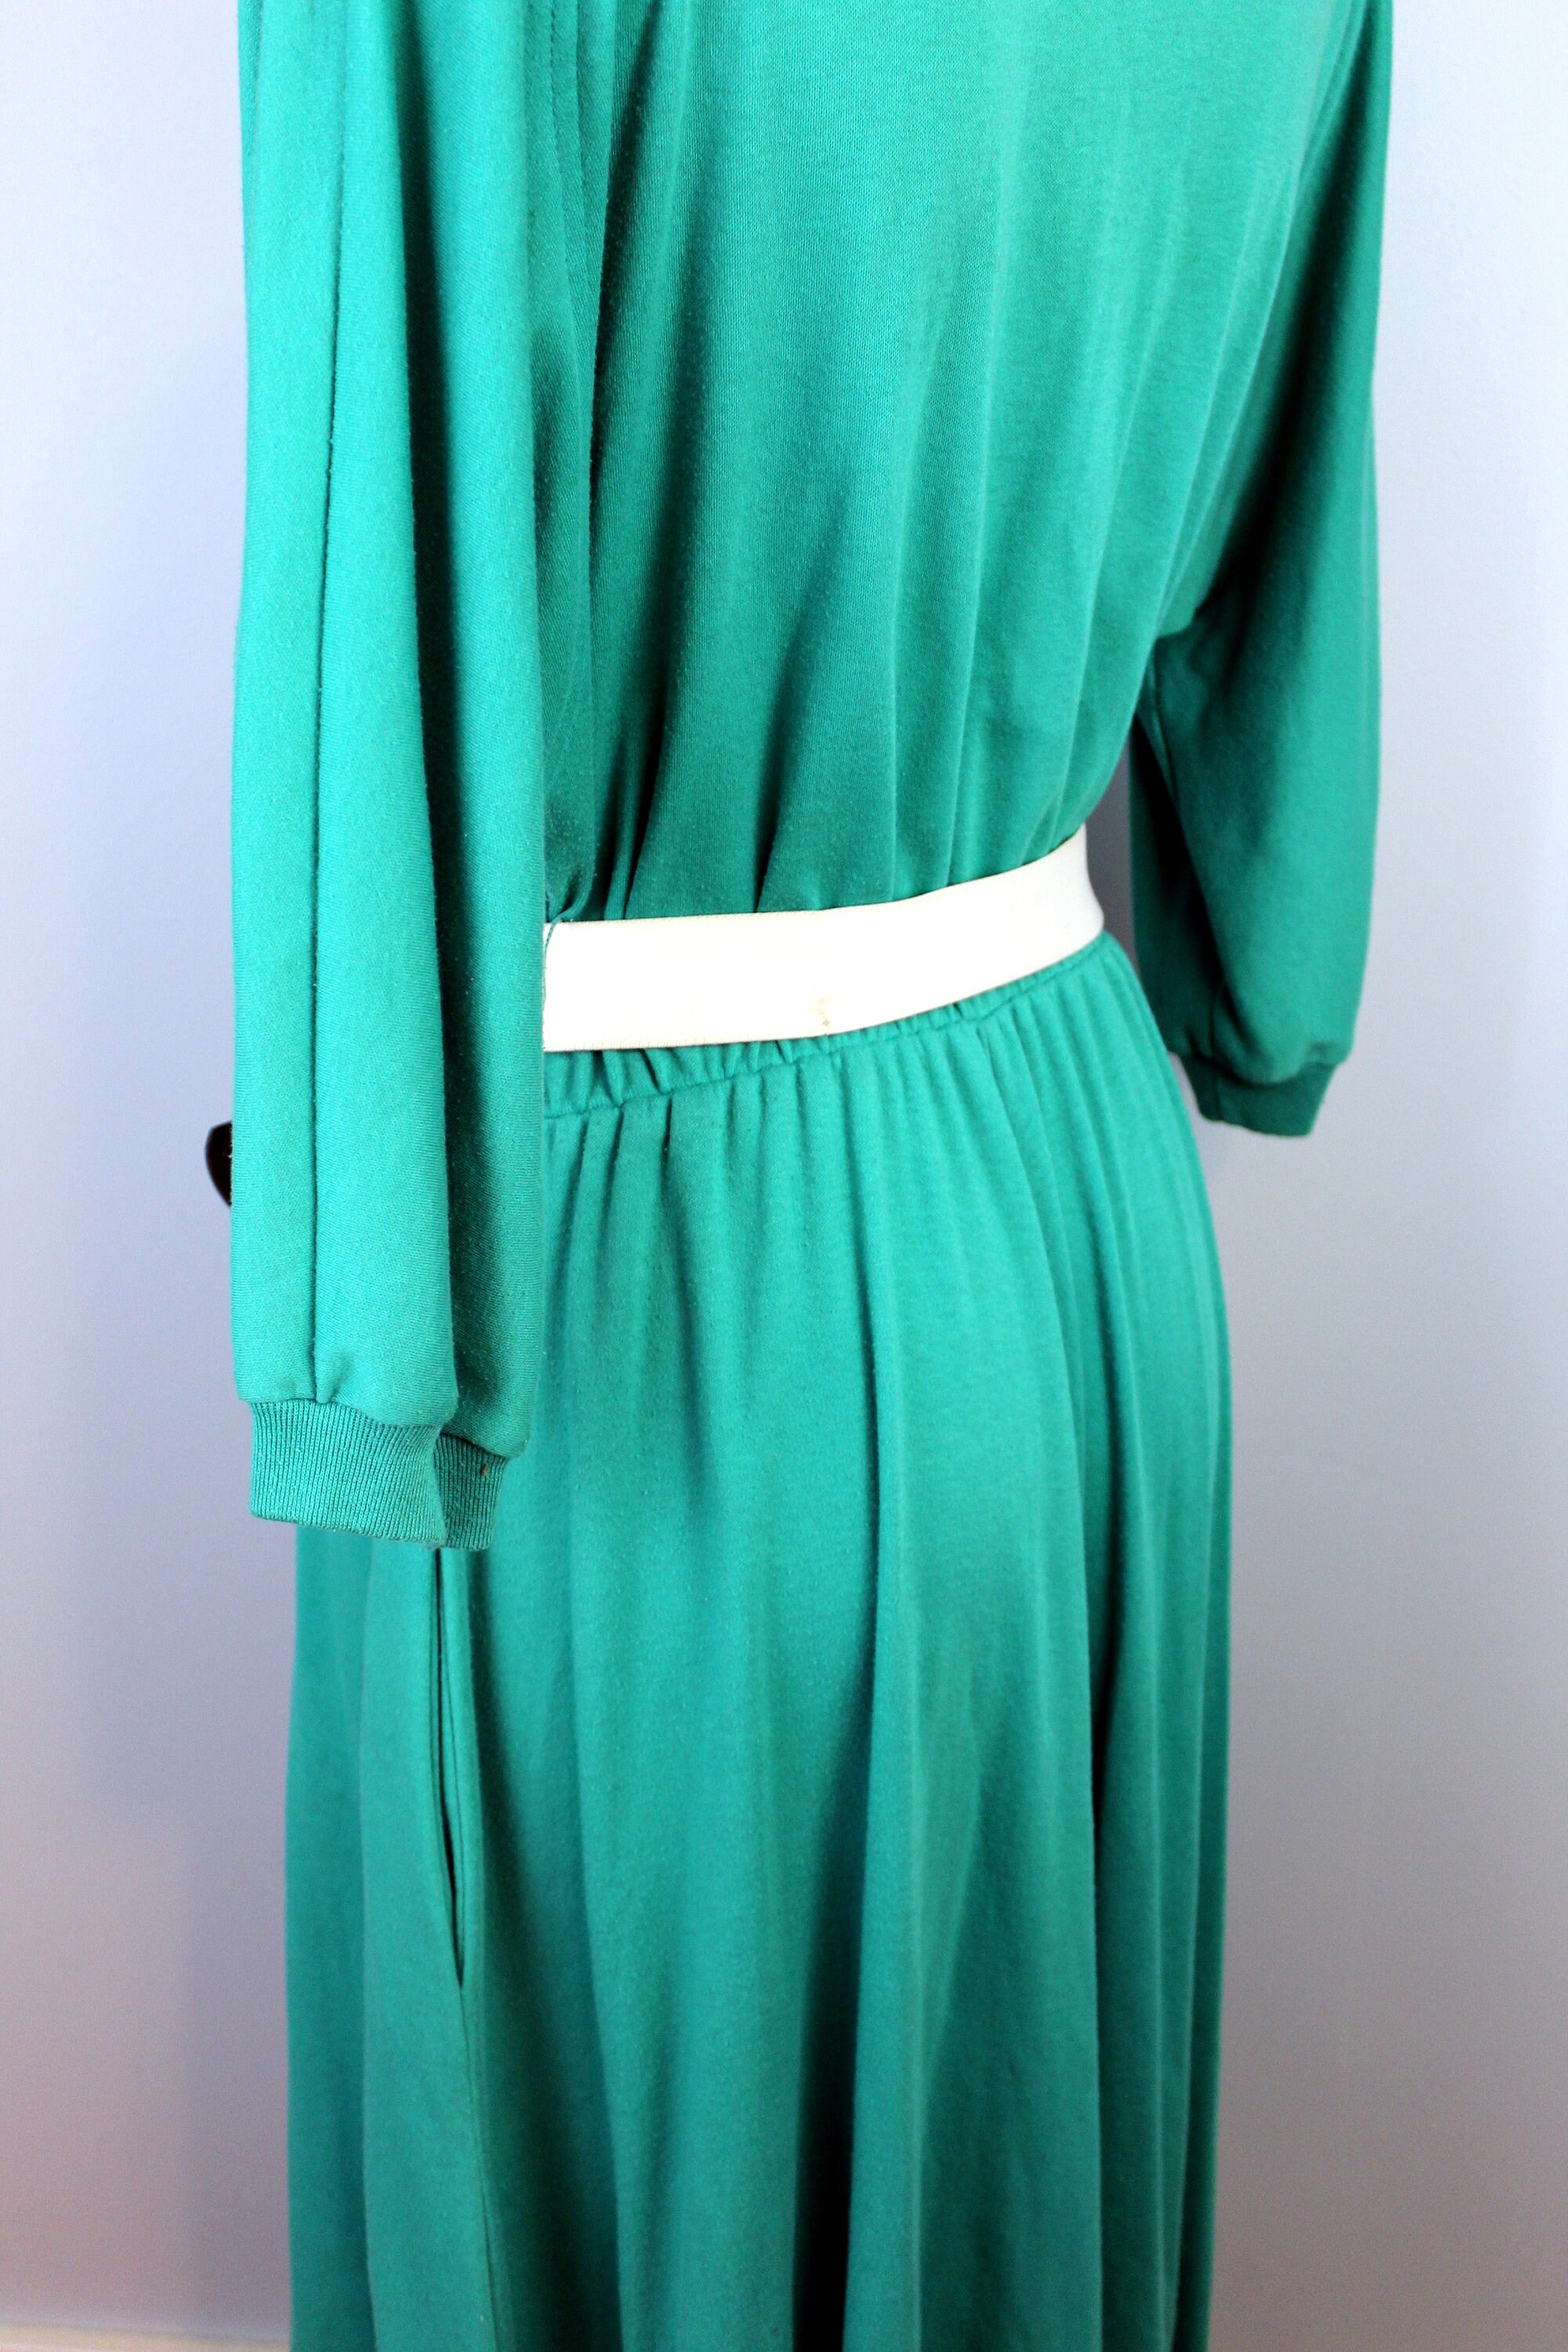 Vintage Dress 1970s Maxi Dress With Belt Retro Solid Green - Etsy